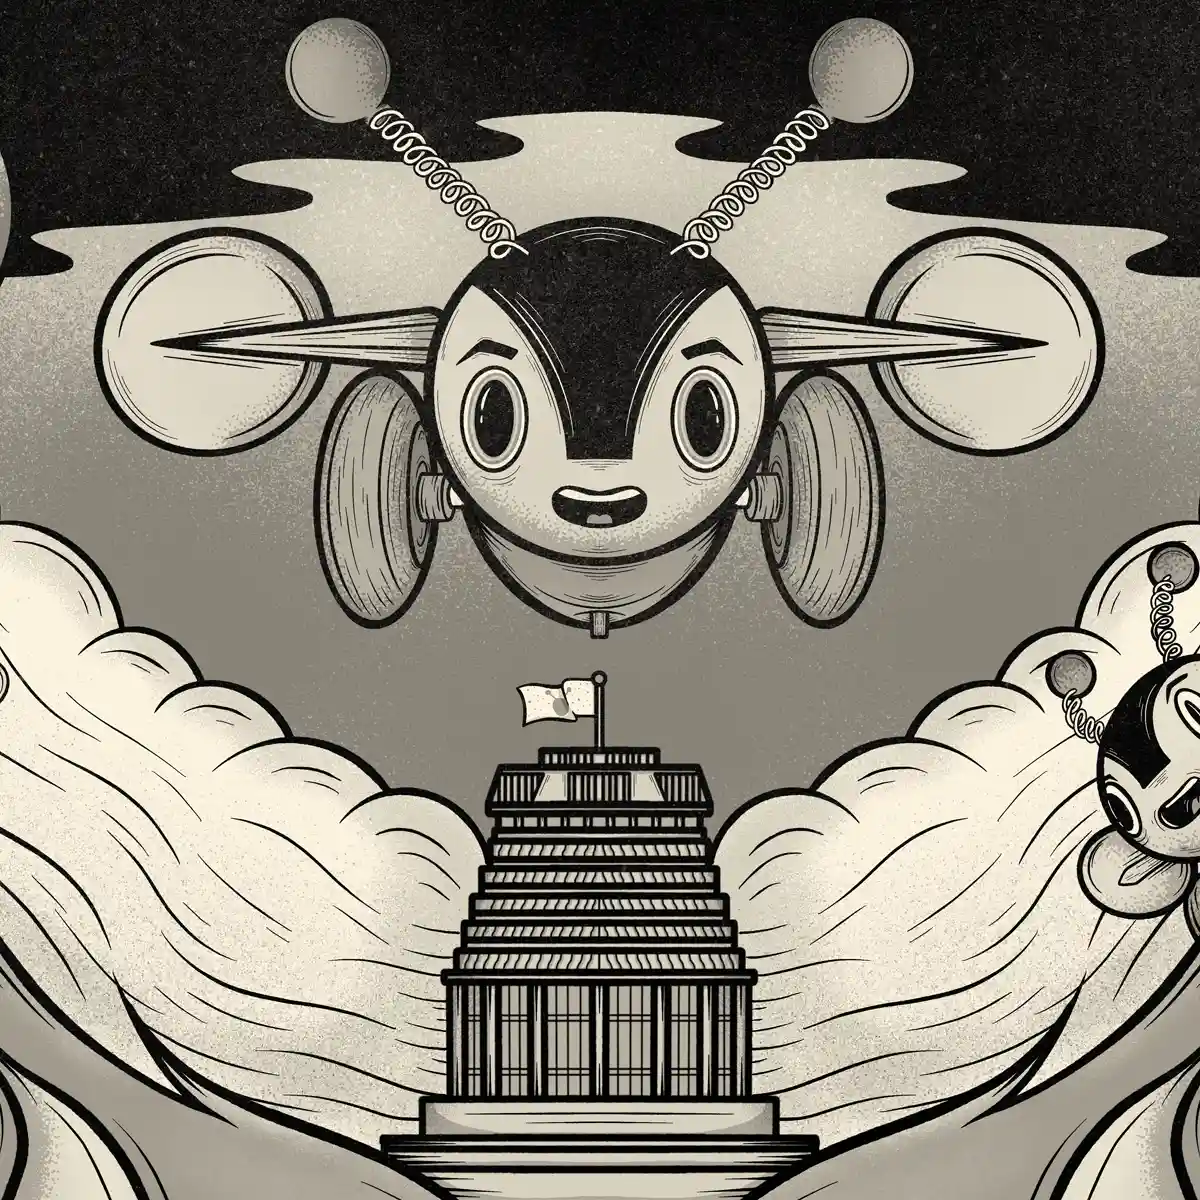 Illustration of a giant Buzzy Bee invading The Beehive in Wellington, New Zealand